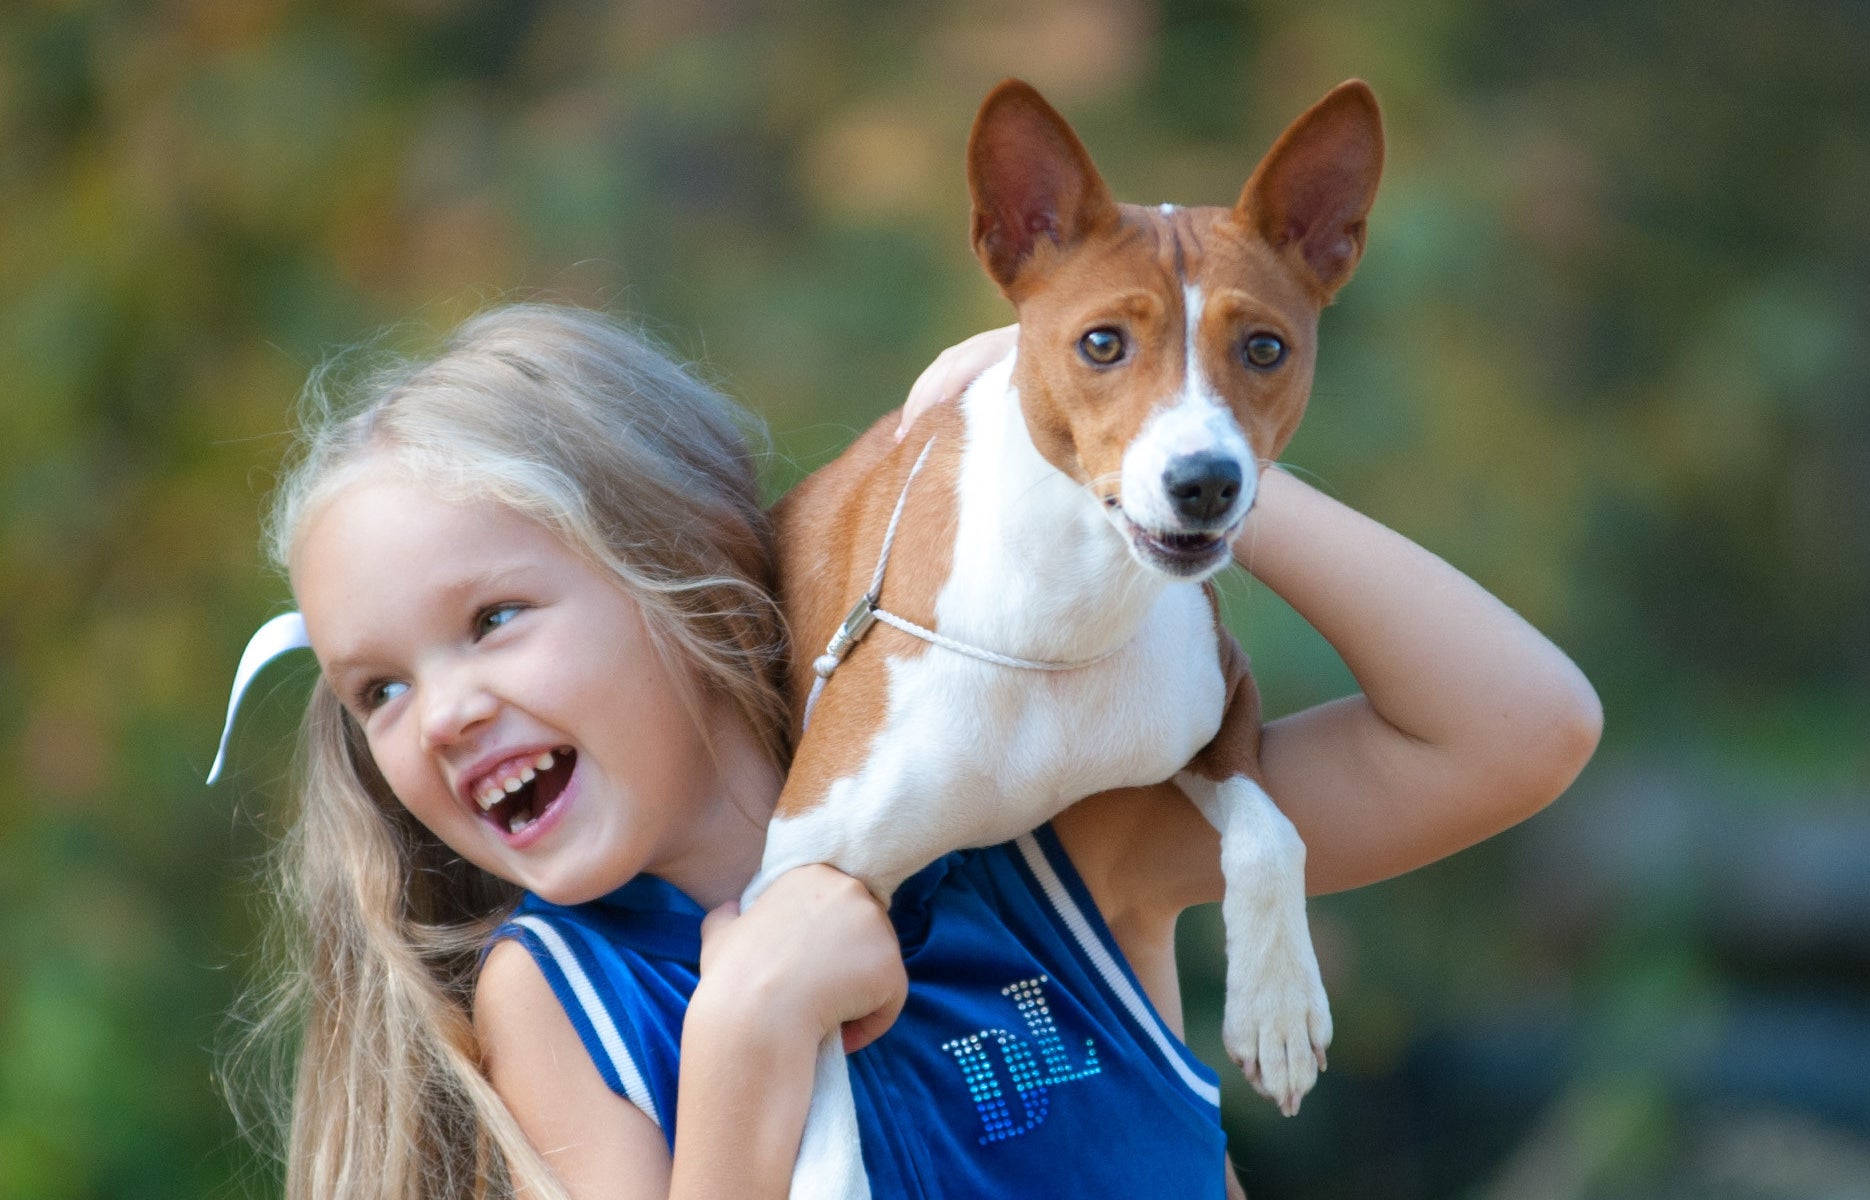 Laughing girl with basenji dog, holding it on her shoulders